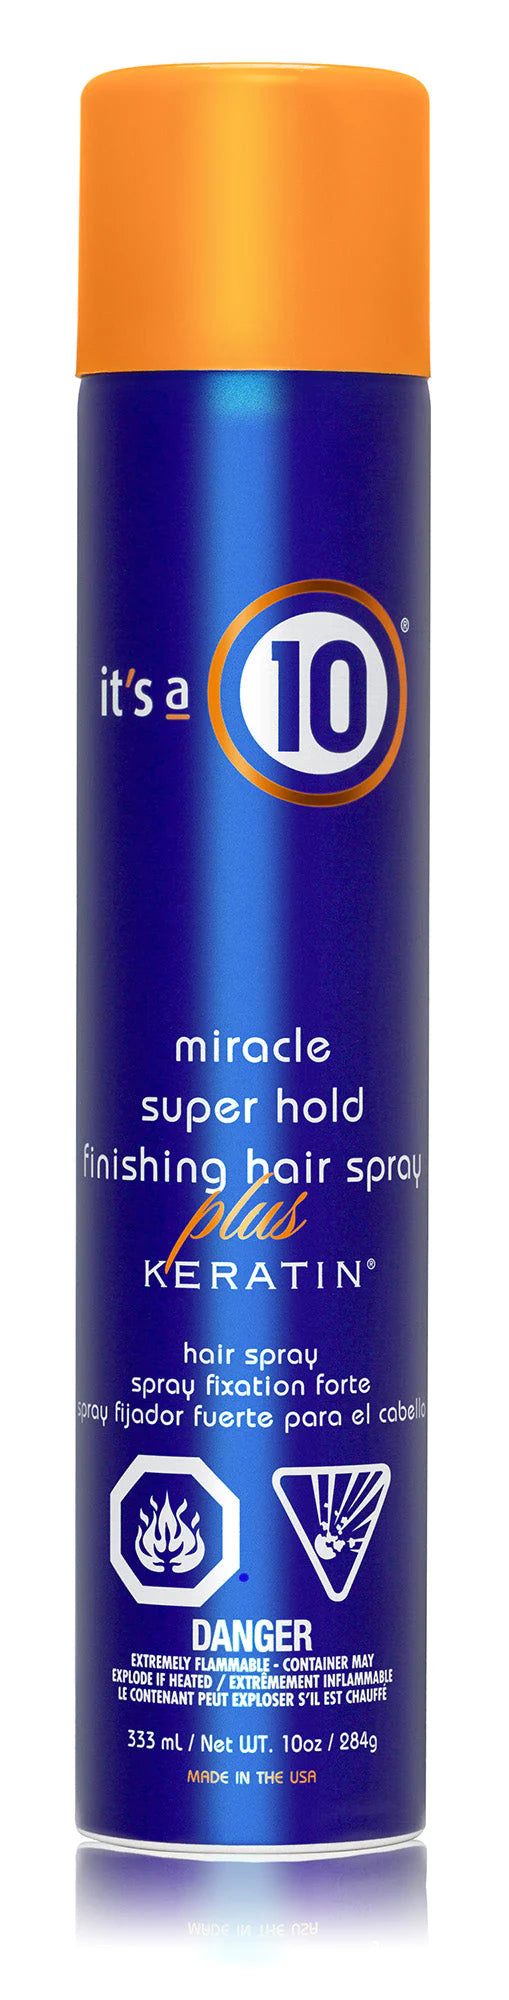 It's a 10 Miracle Super Hold Finishing Hairspray with Keratin 10 oz bottle image